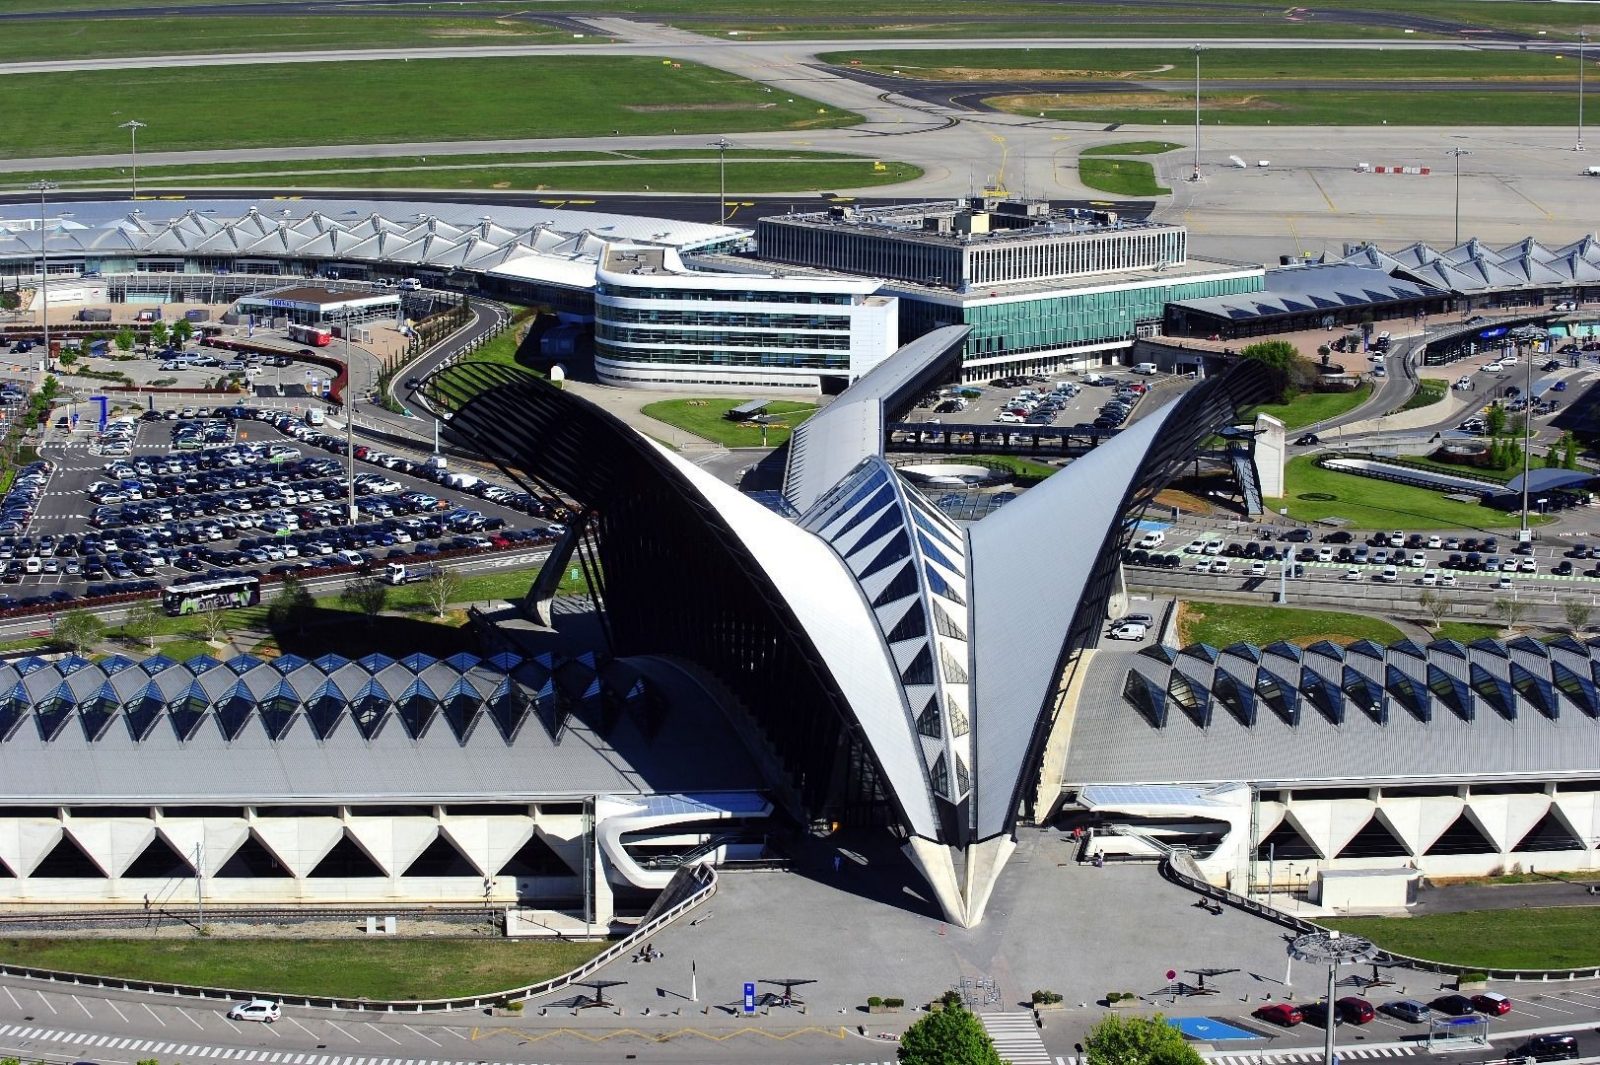 Lyon Airport; a car breached the security and air traffic was put to a halt